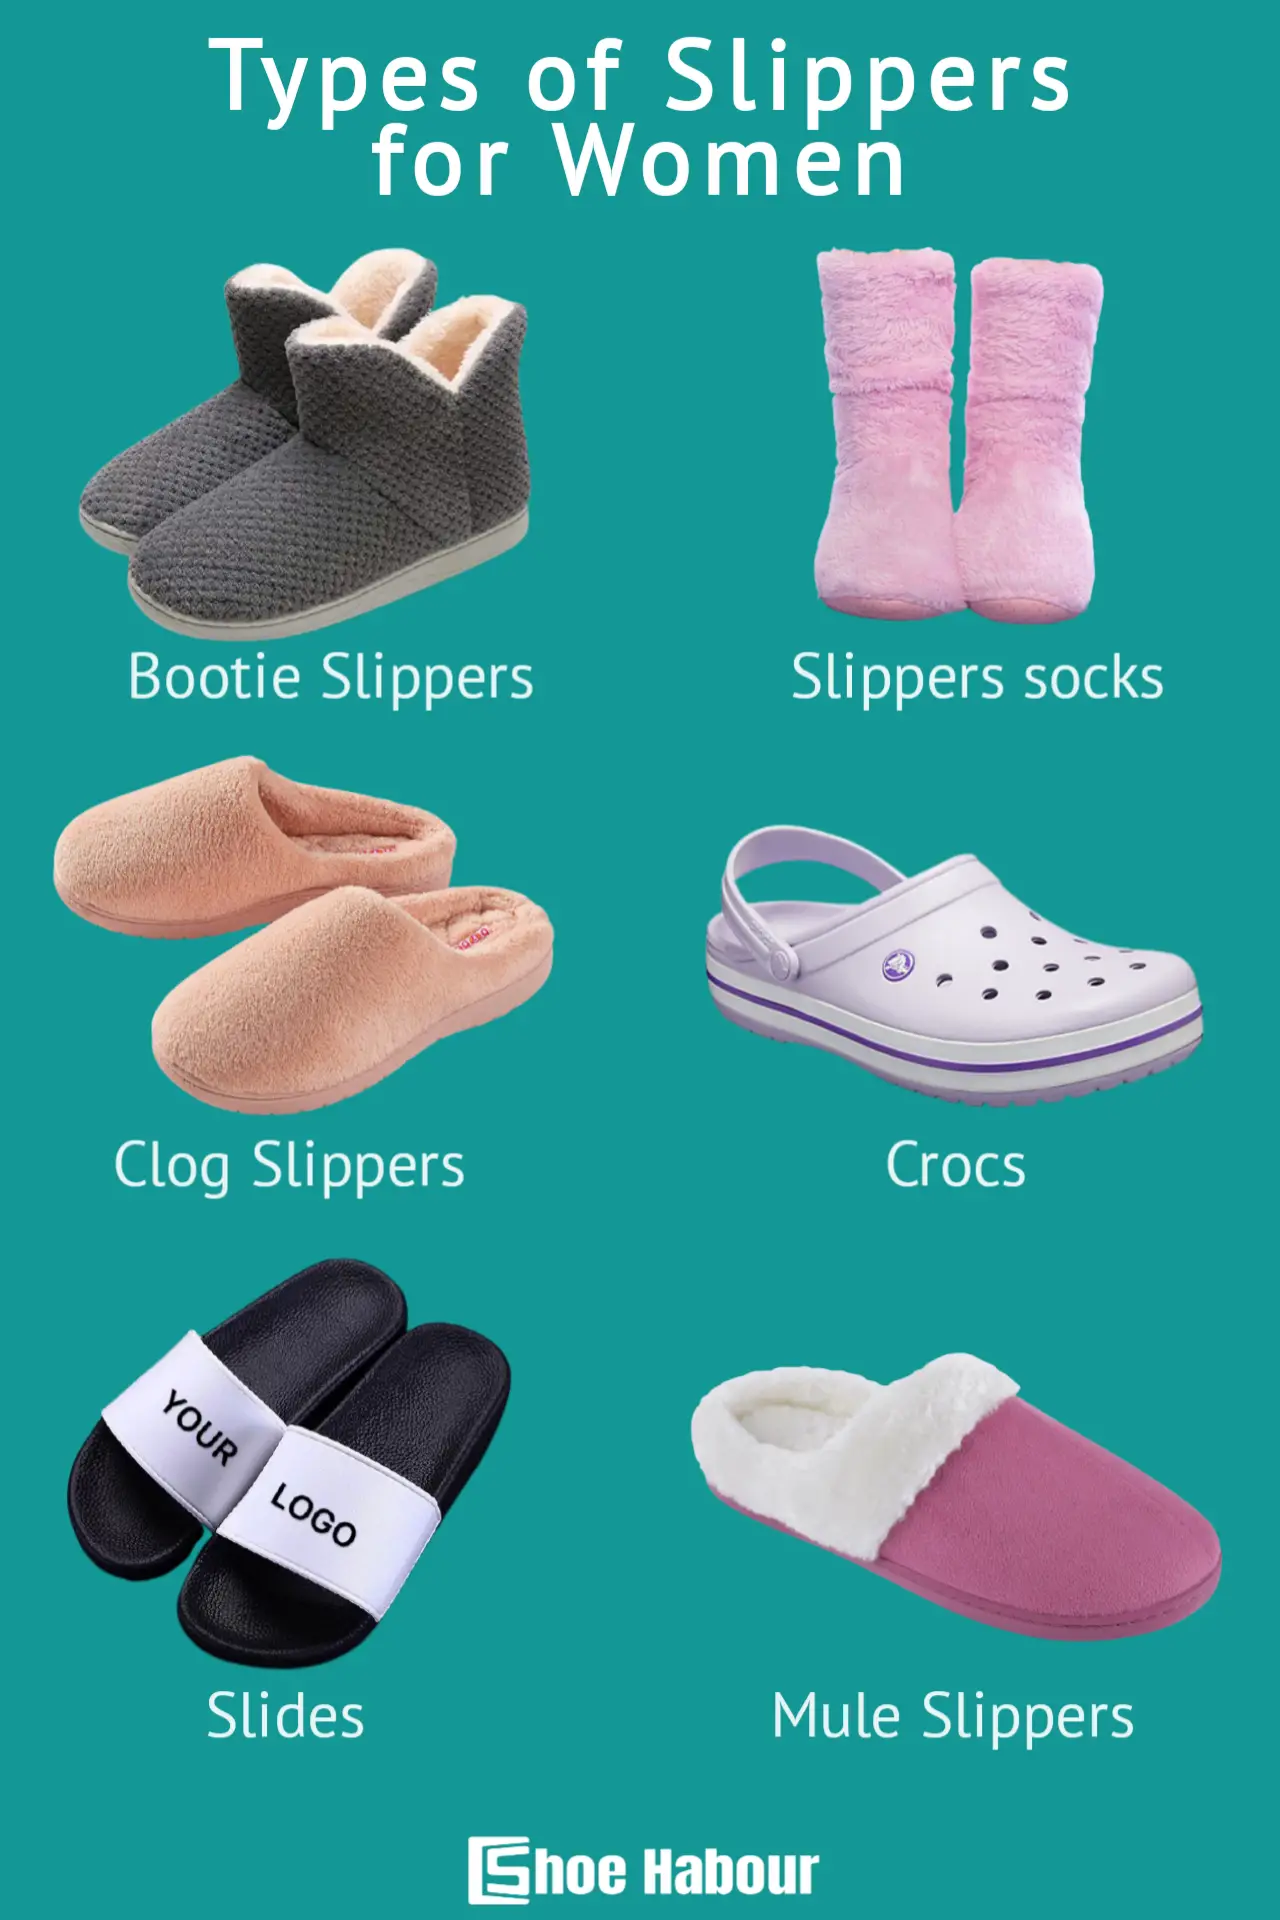 Types of slippers for women